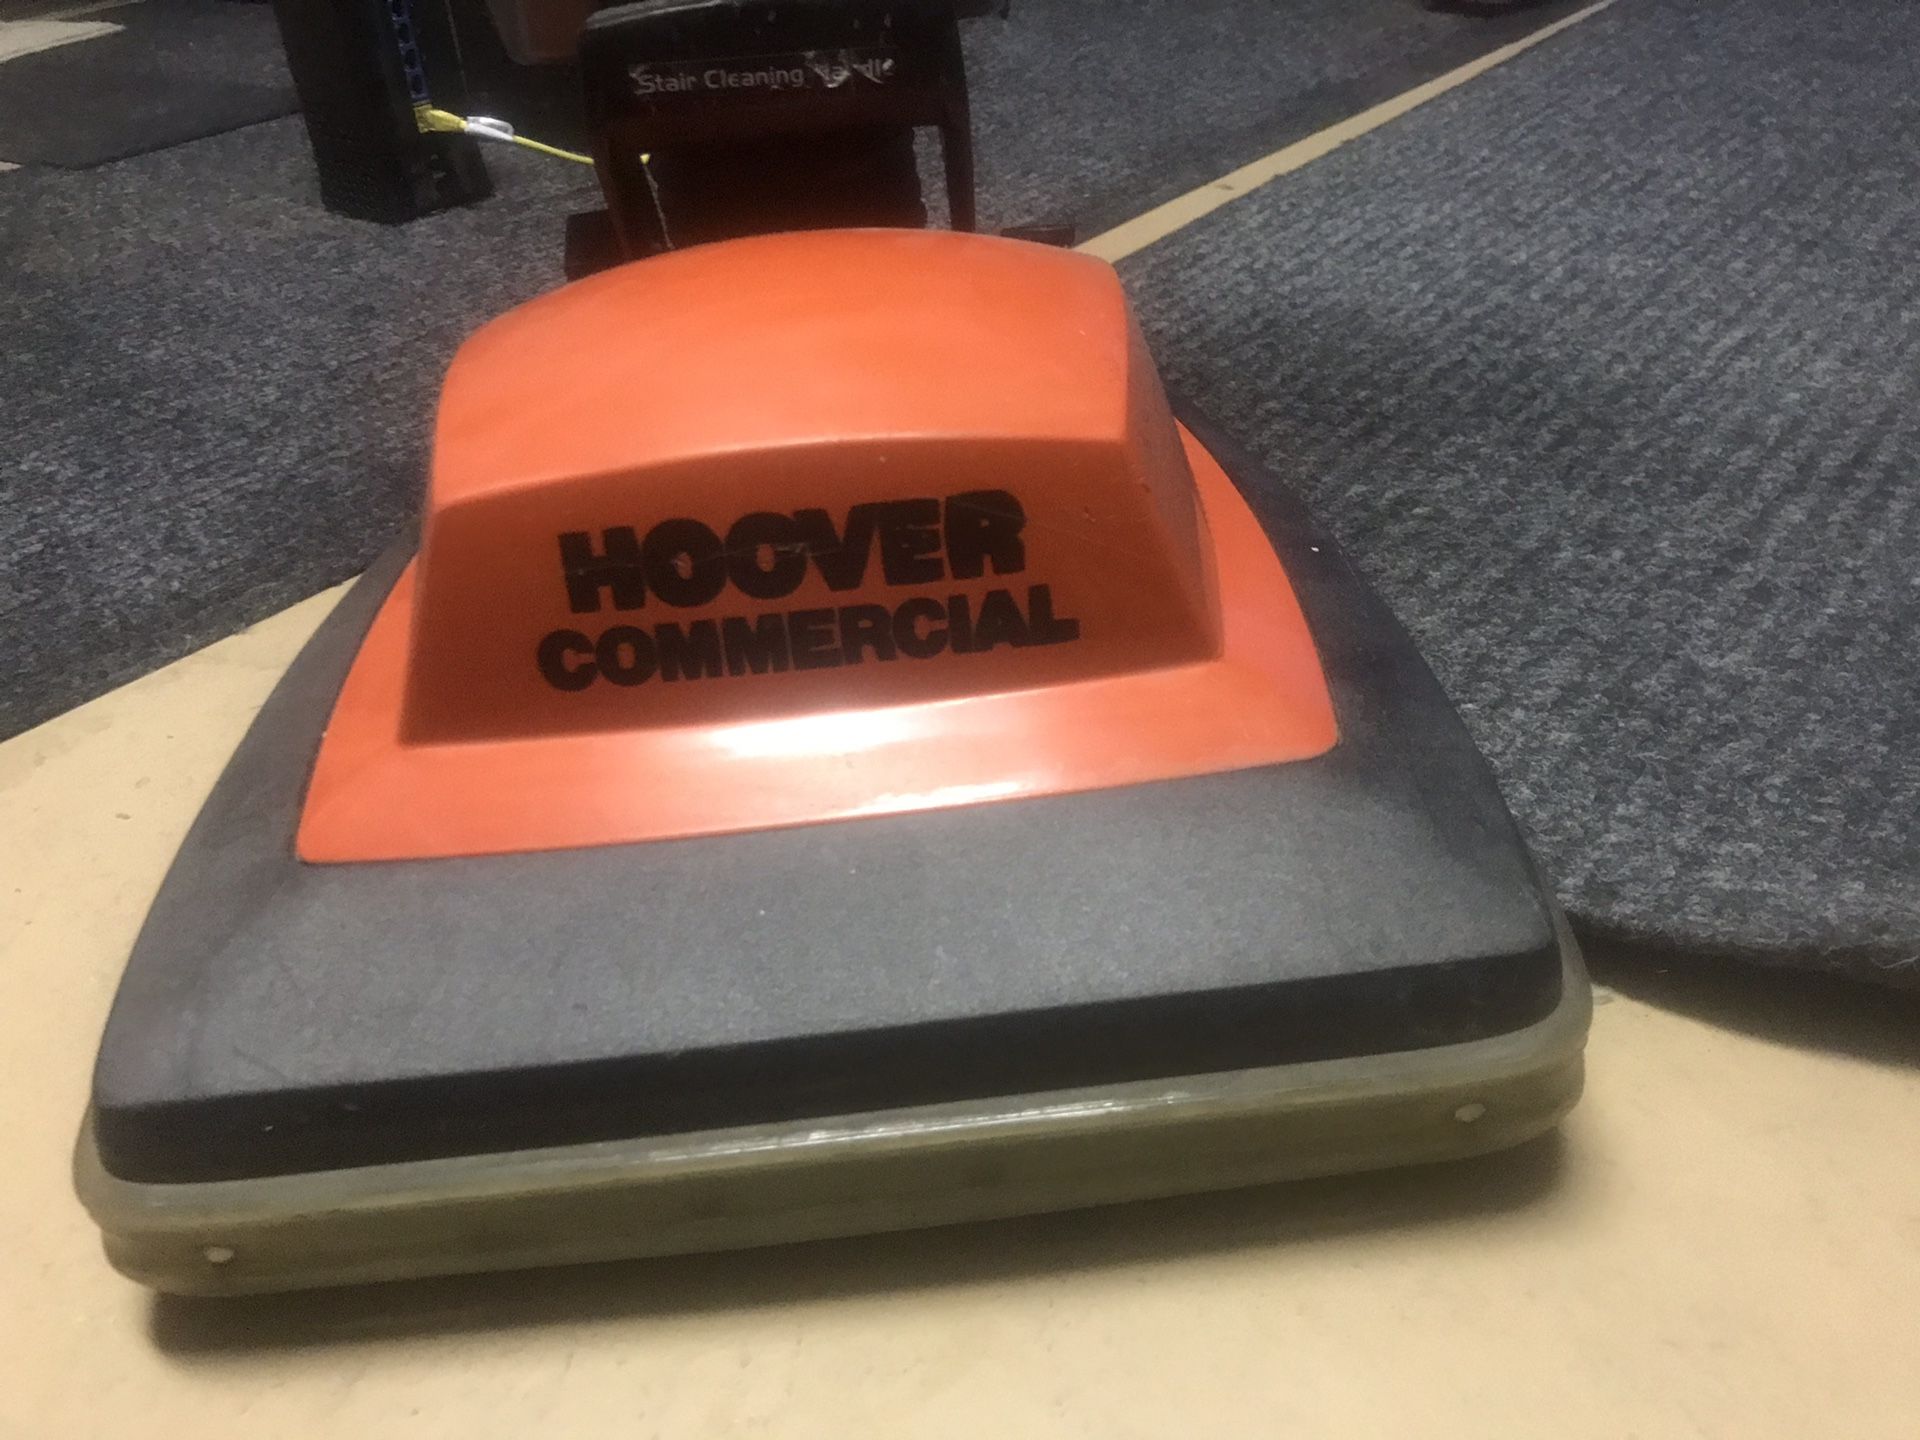 Selling Bagless commercial Hoover in great shape!!